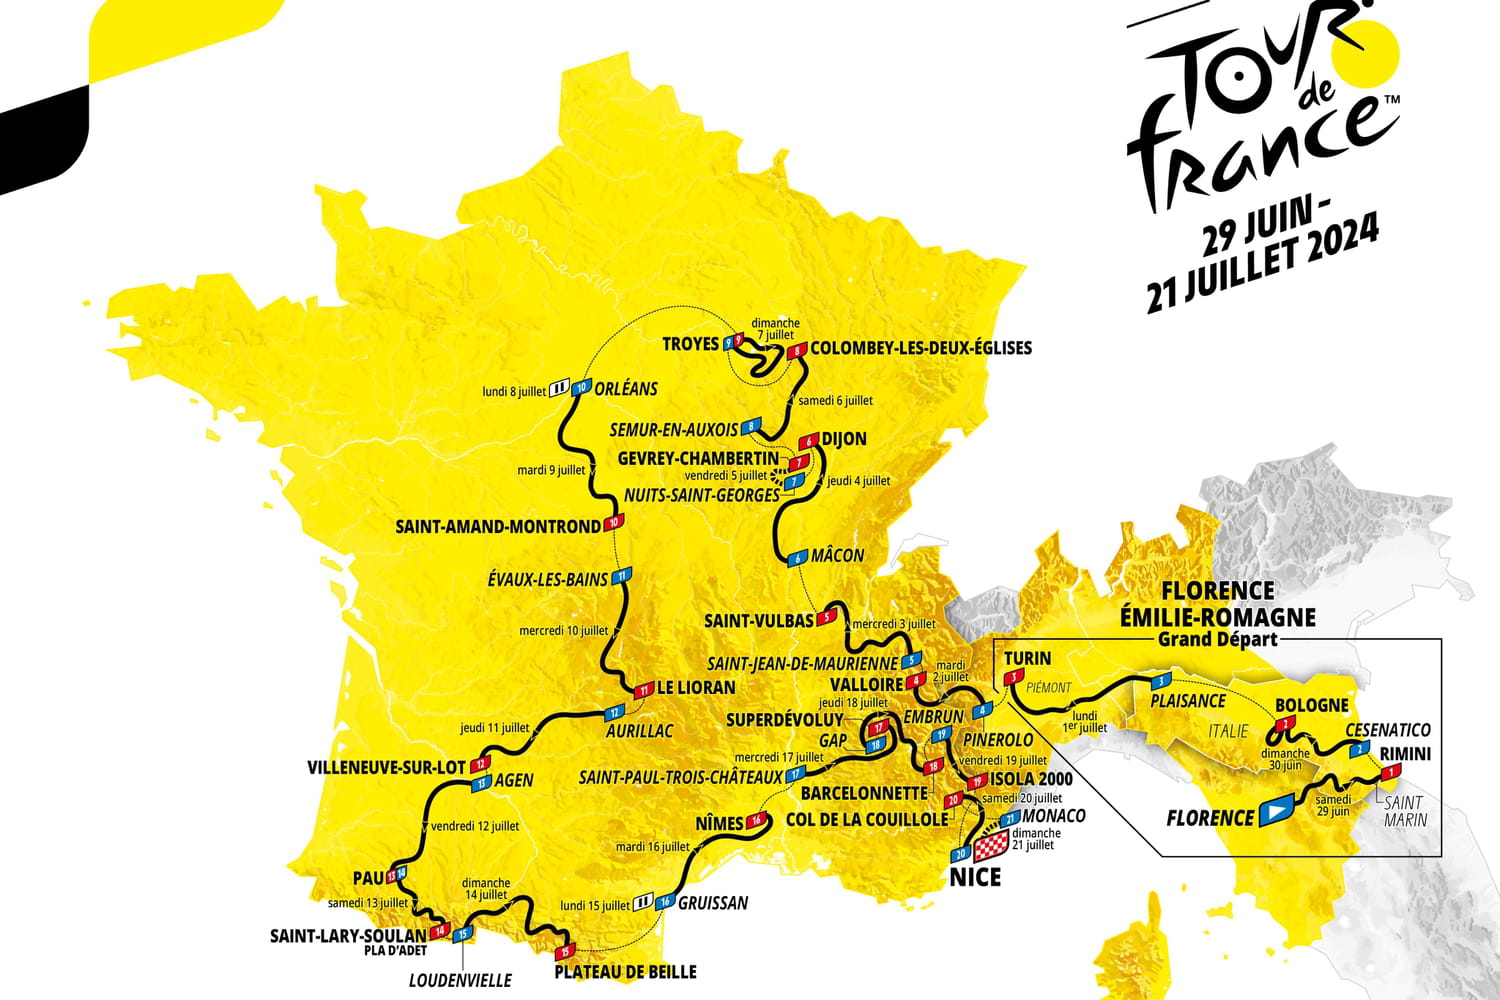 Tour de France 2024 the route map and profile of the 21 stages Earth